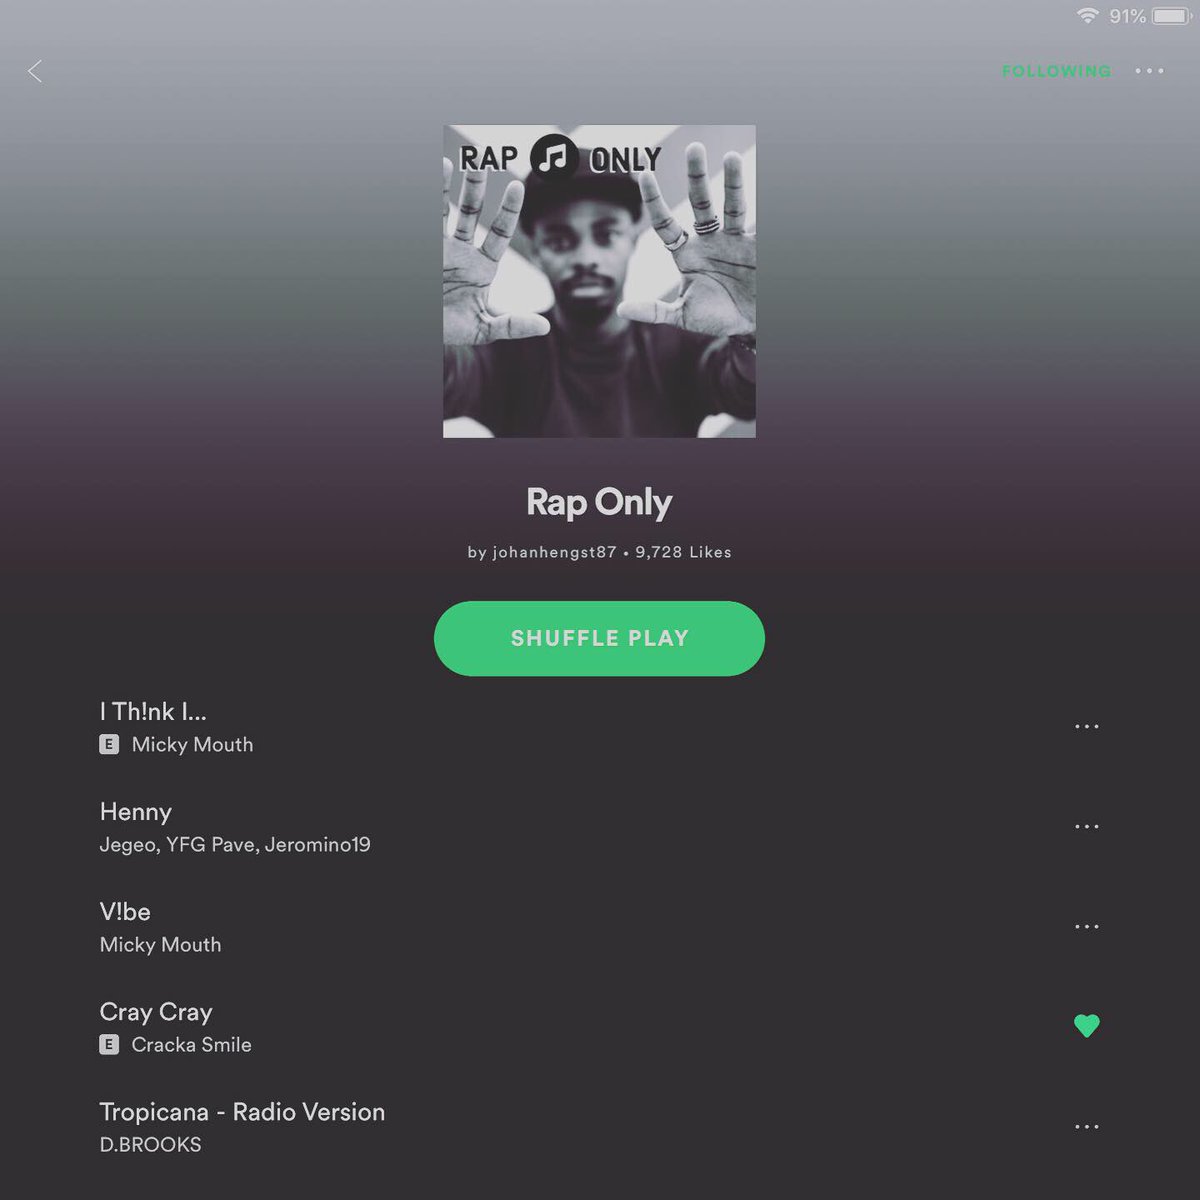 Check me out on these 3 awesome #spotifyplaylists #spotifyplaylist #spotify #music #newMusic #newRap #rap #rapper #itunes #neworleansartist #artistsoninstagram #artist #artistoninstagram